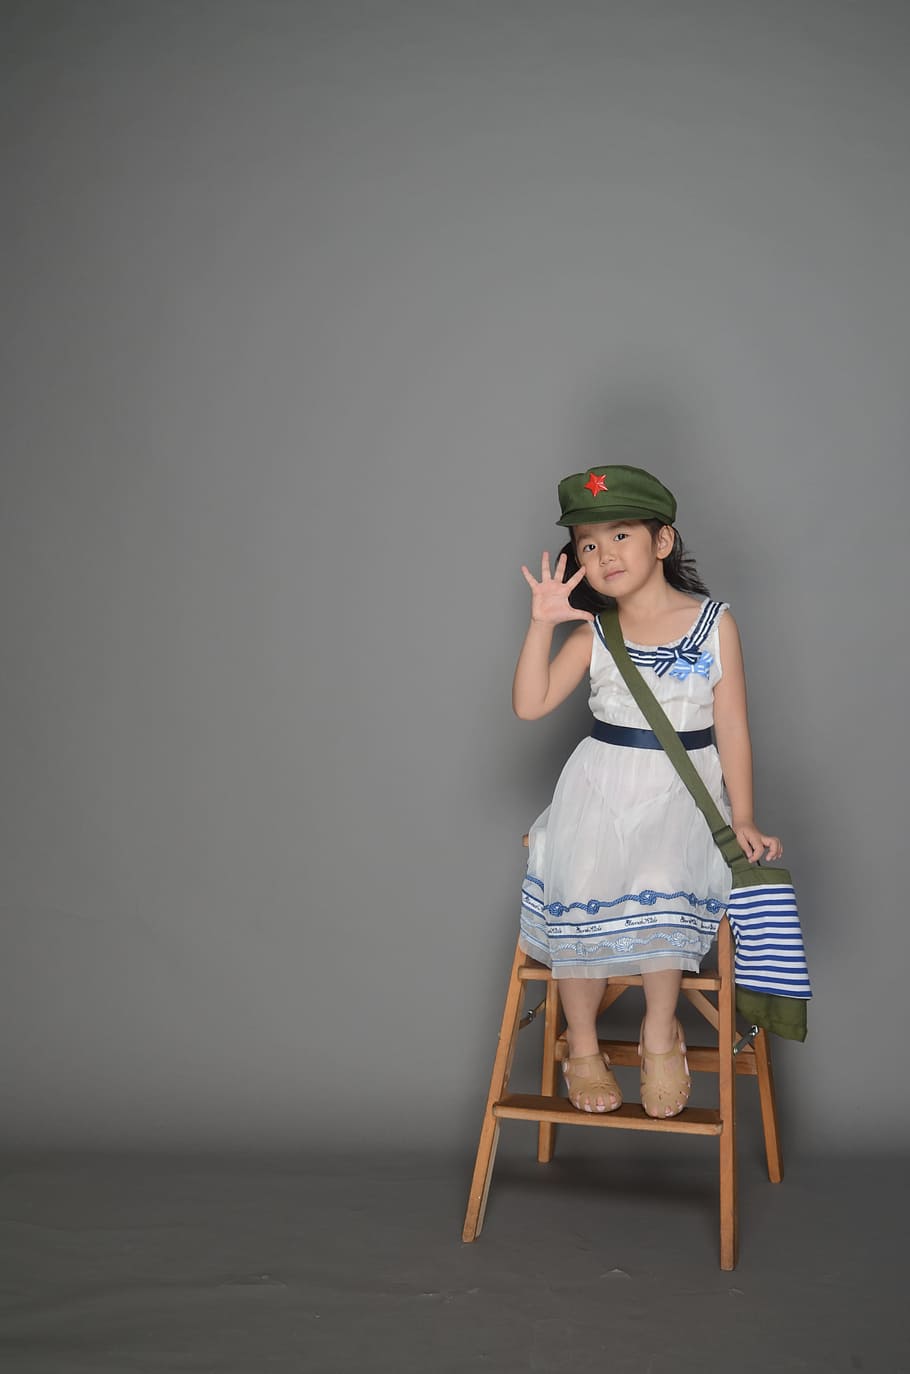 Cute, Military, Cap, Army, Backpack, Child, military cap, army backpack